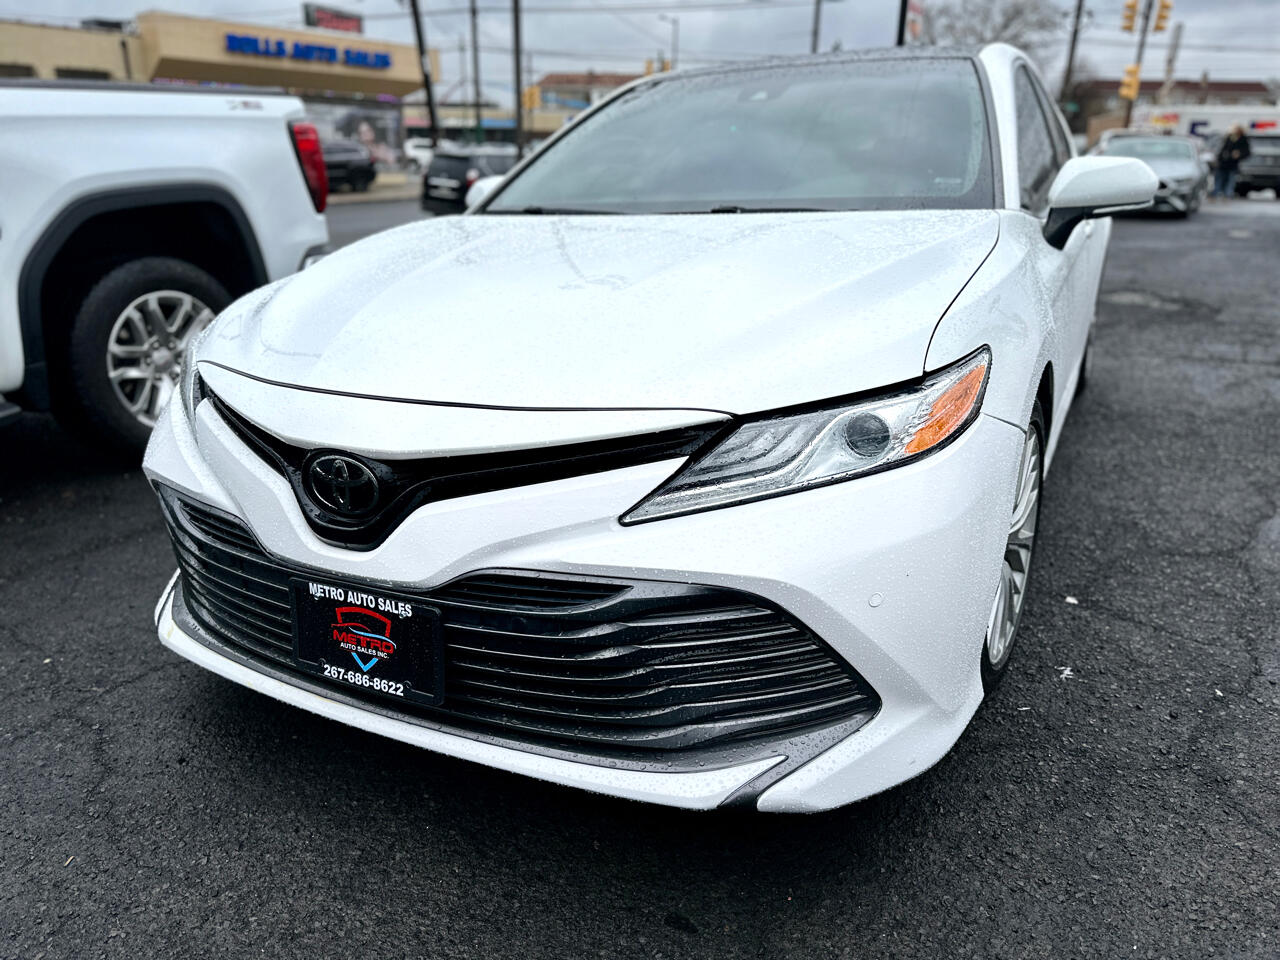 Toyota Camry 2014.5 4dr Sdn I4 Auto XLE (Natl) 2018